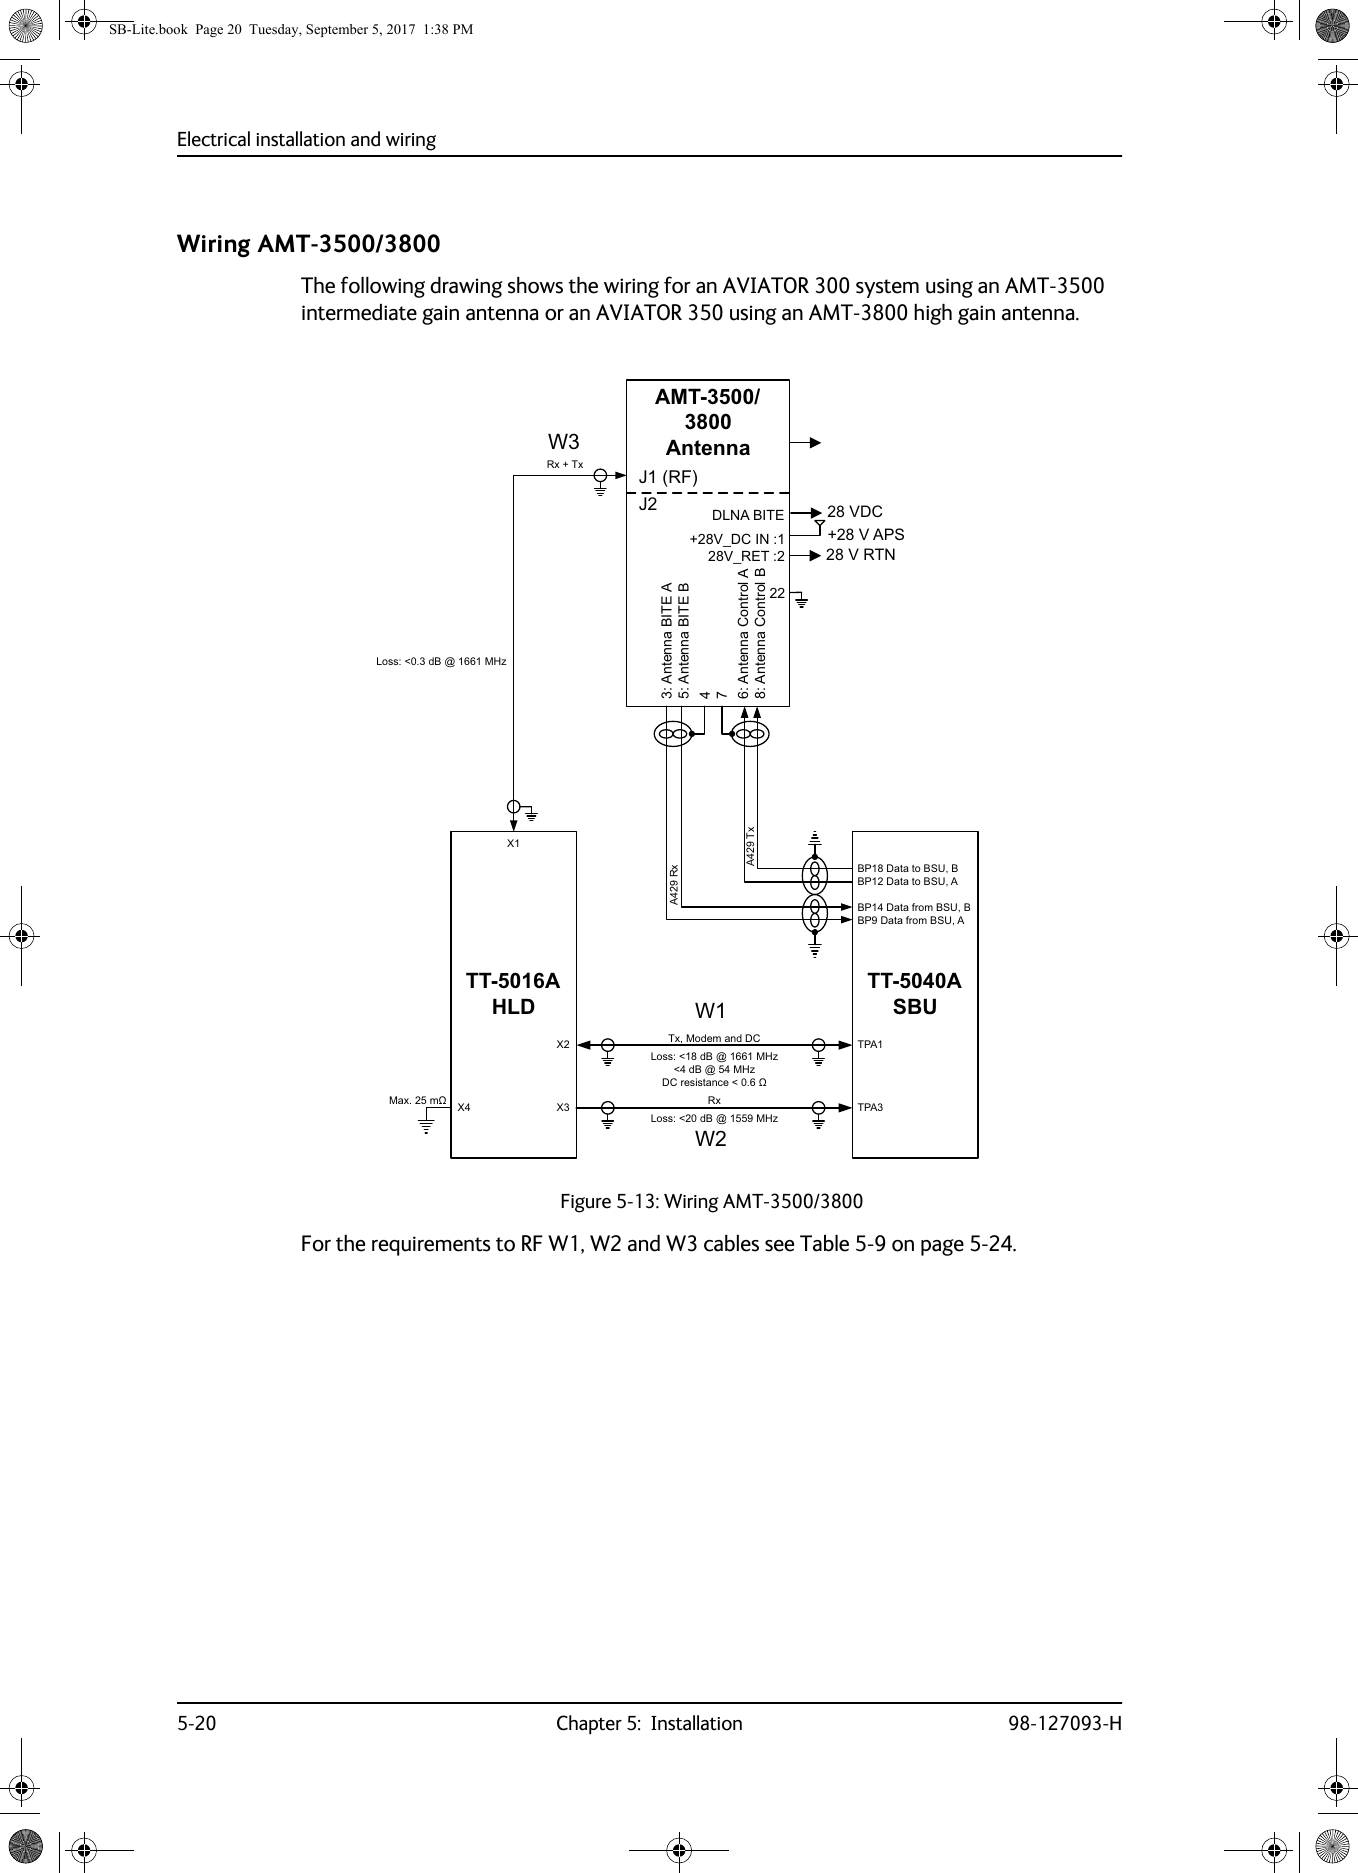 Electrical installation and wiring5-20 Chapter 5:  Installation 98-127093-HWiring AMT-3500/3800The following drawing shows the wiring for an AVIATOR 300 system using an AMT-3500 intermediate gain antenna or an AVIATOR 350 using an AMT-3800 high gain antenna.For the requirements to RF W1, W2 and W3 cables see Table  5-9 on page  5-24.Figure 5-13: Wiring AMT-3500/3800/RVVG%#0+]G%#0+]&apos;&amp;UHVLVWDQFHȍ:::77$+/&apos;$07$QWHQQD;77$6%8$7[$5[73$73$;;7[0RGHPDQG&apos;&amp;5[5[7[%3&apos;DWDWR%68%%3&apos;DWDWR%68$%3&apos;DWDIURP%68%%3&apos;DWDIURP%68$-5)9$36$QWHQQD%,7($$QWHQQD%,7(%$QWHQQD&amp;RQWURO$$QWHQQD&amp;RQWURO%&apos;/1$%,7(9B&apos;&amp;,19B5(7-95710D[Pȍ ;/RVVG%#0+]/RVVG%#0+]9&apos;&amp;SB-Lite.book  Page 20  Tuesday, September 5, 2017  1:38 PM